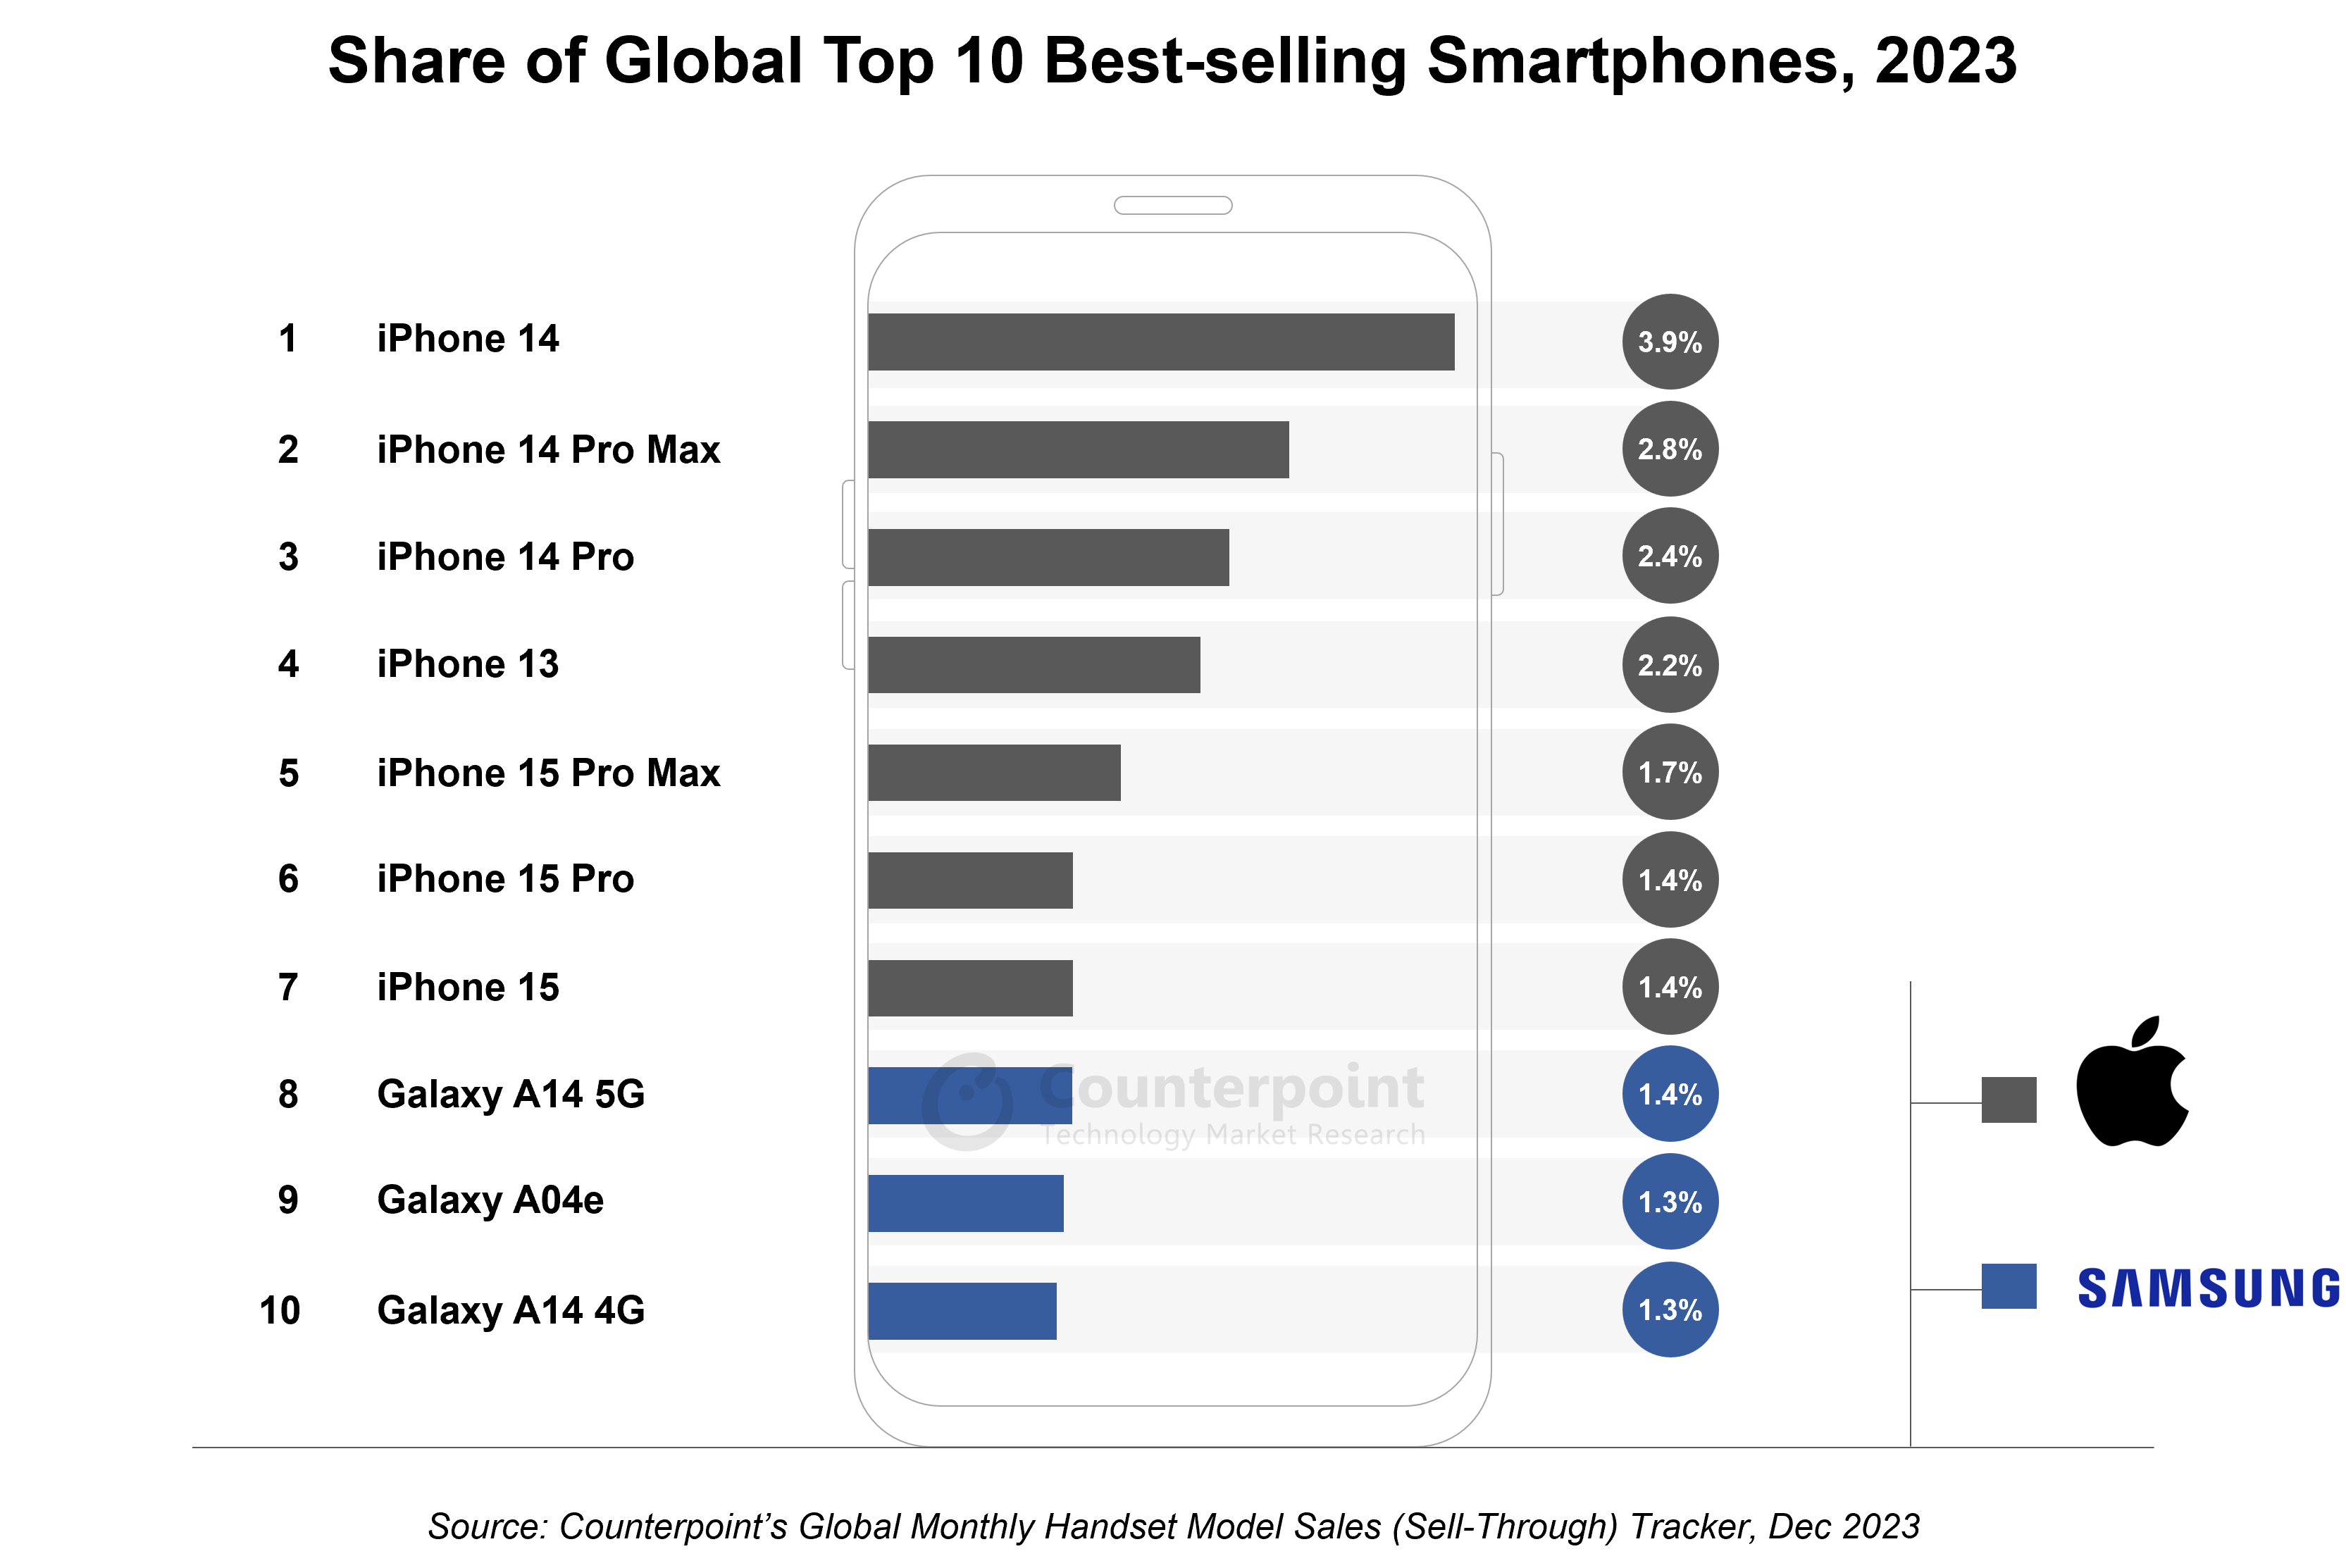 Share-of-Global-Top-10-Best-selling-Smartphones-2023.png